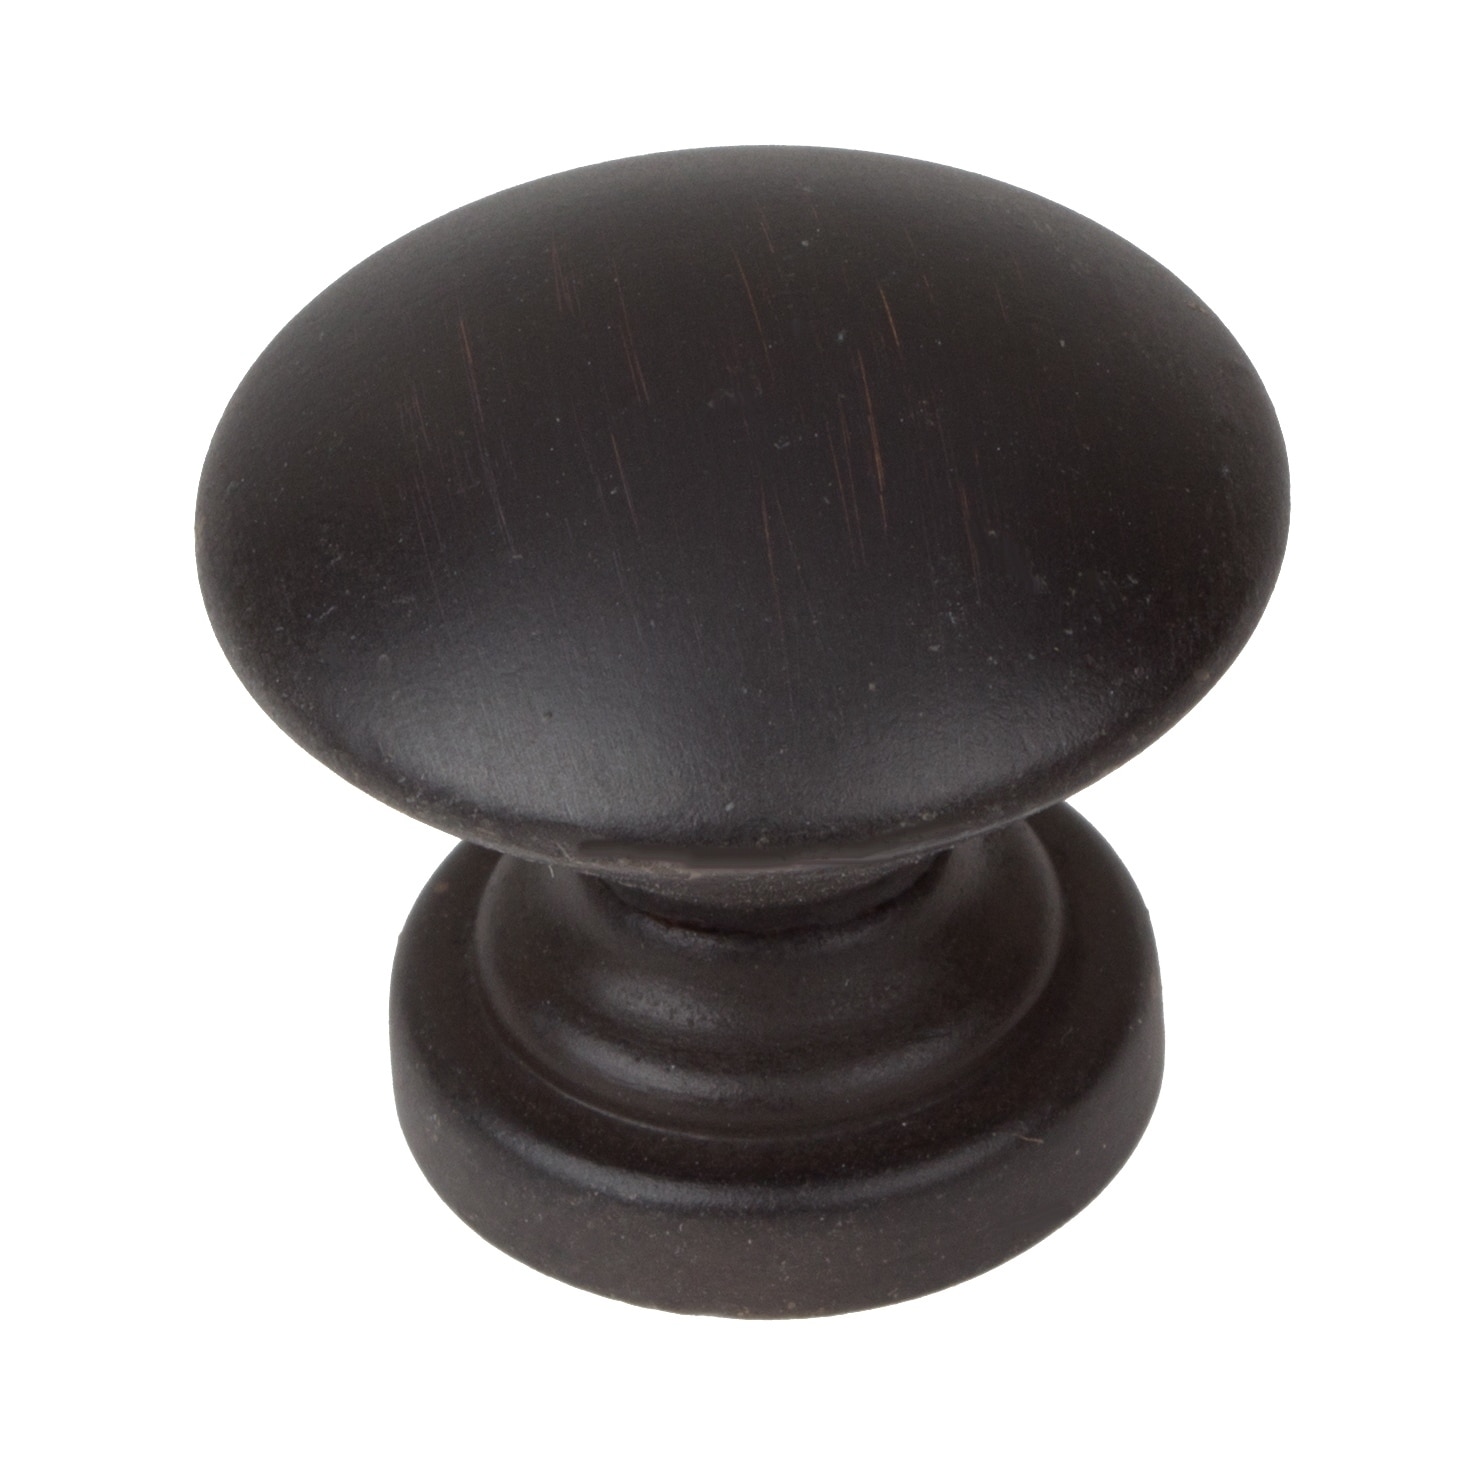 GlideRite 1 in. Classic Round Convex Cabinet Hardware Knobs, Oil Rubbed Bronze, Pack of 25 - image 1 of 5